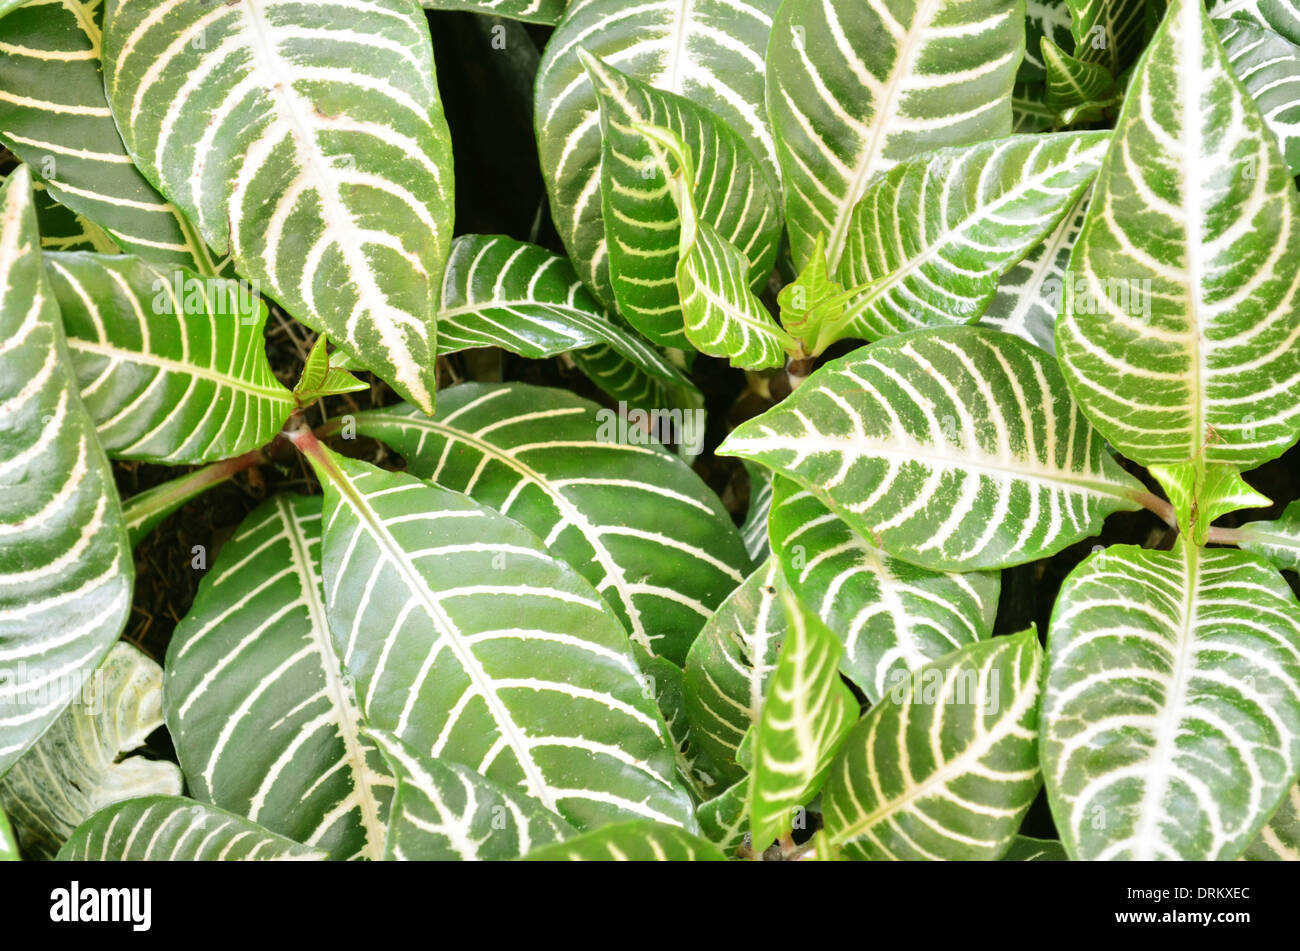 Photograph of green leaves with white stripes cuniformes Stock Photo